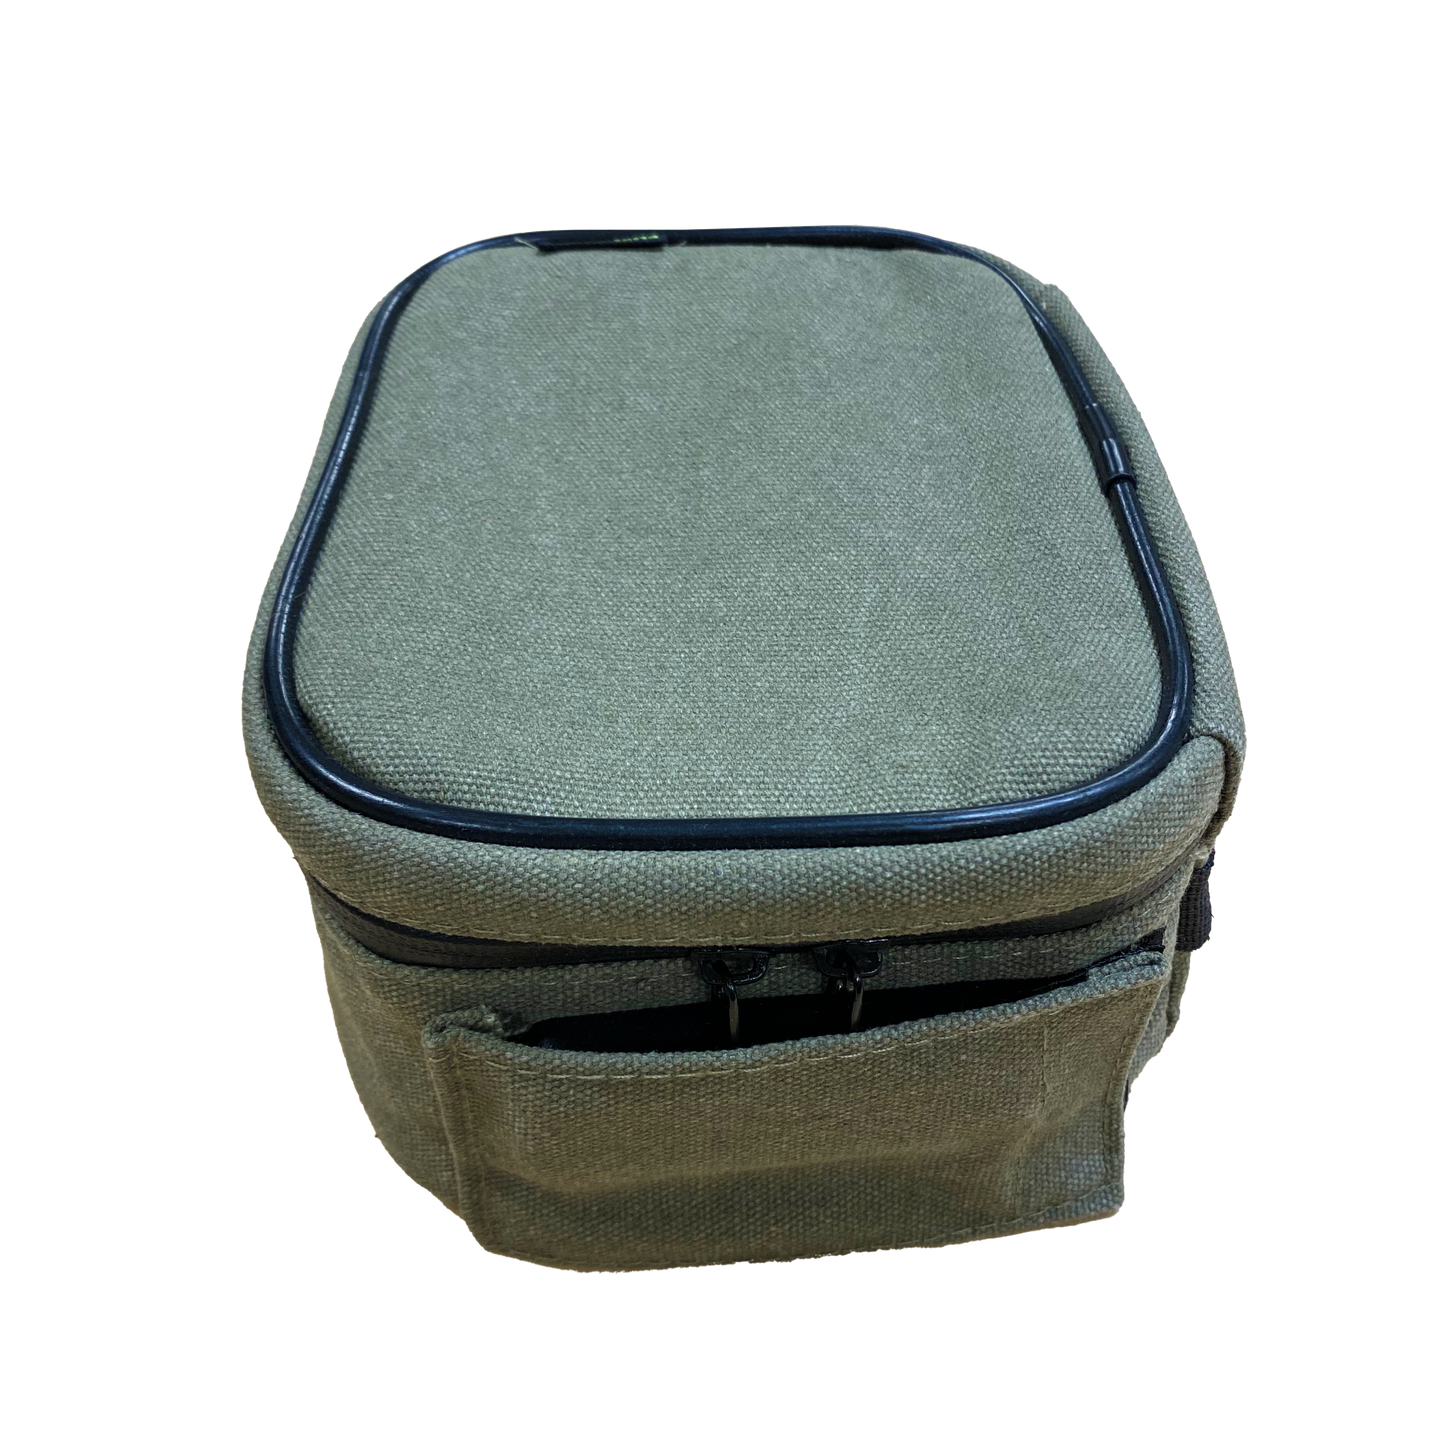 ITEM NUMBER 022150 CANVAS LOCKING BAG WITH TRAY 4 PIECES PER DISPLAY